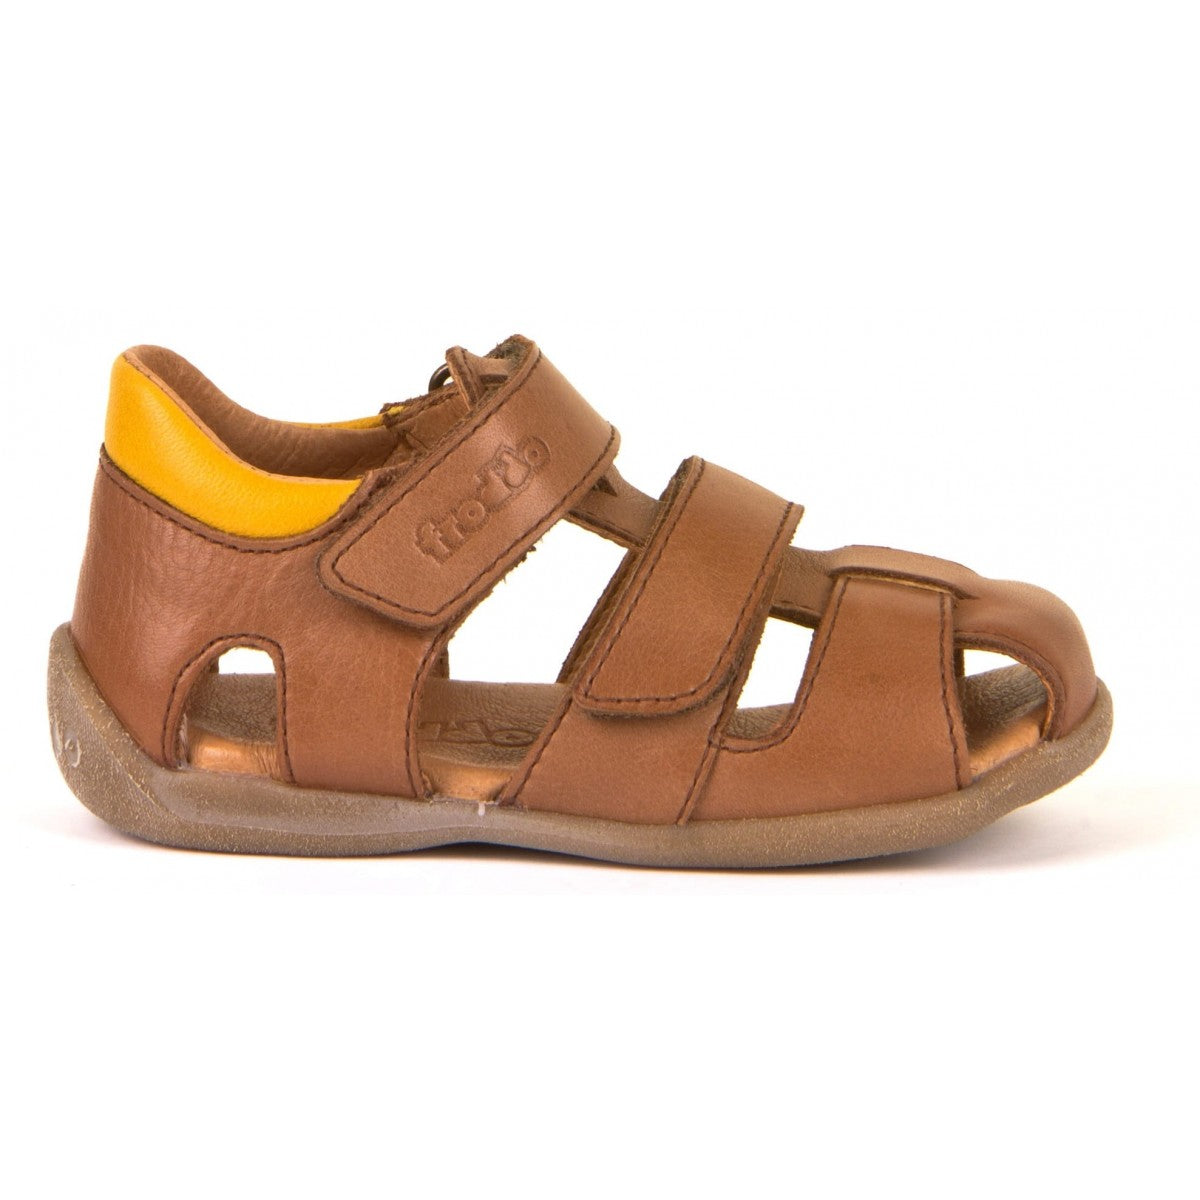 Froddo  Leather Closed Toe Sandal In Brown